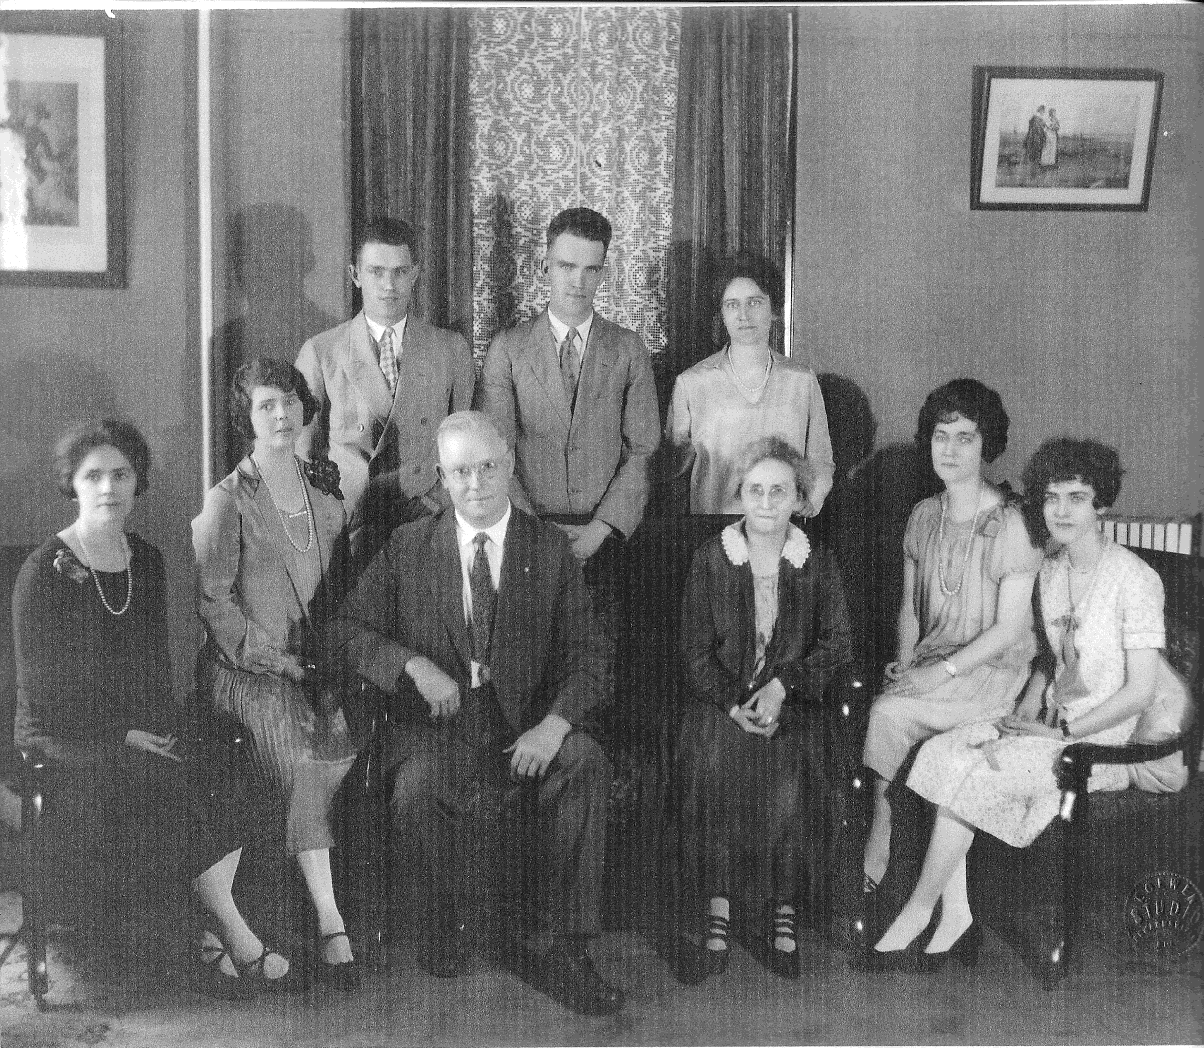   In this undated portrait the members of the Shaw family are: (from left, front) row) Laura Shaw Crossman, Irene Shaw Miller, William Shaw, Elizabeth Reisel Shaw, Mildred Shaw Briggs, Ruth Shaw Smith; (back row) Evan Shaw, Kenneth Shaw, Edith Shaw M